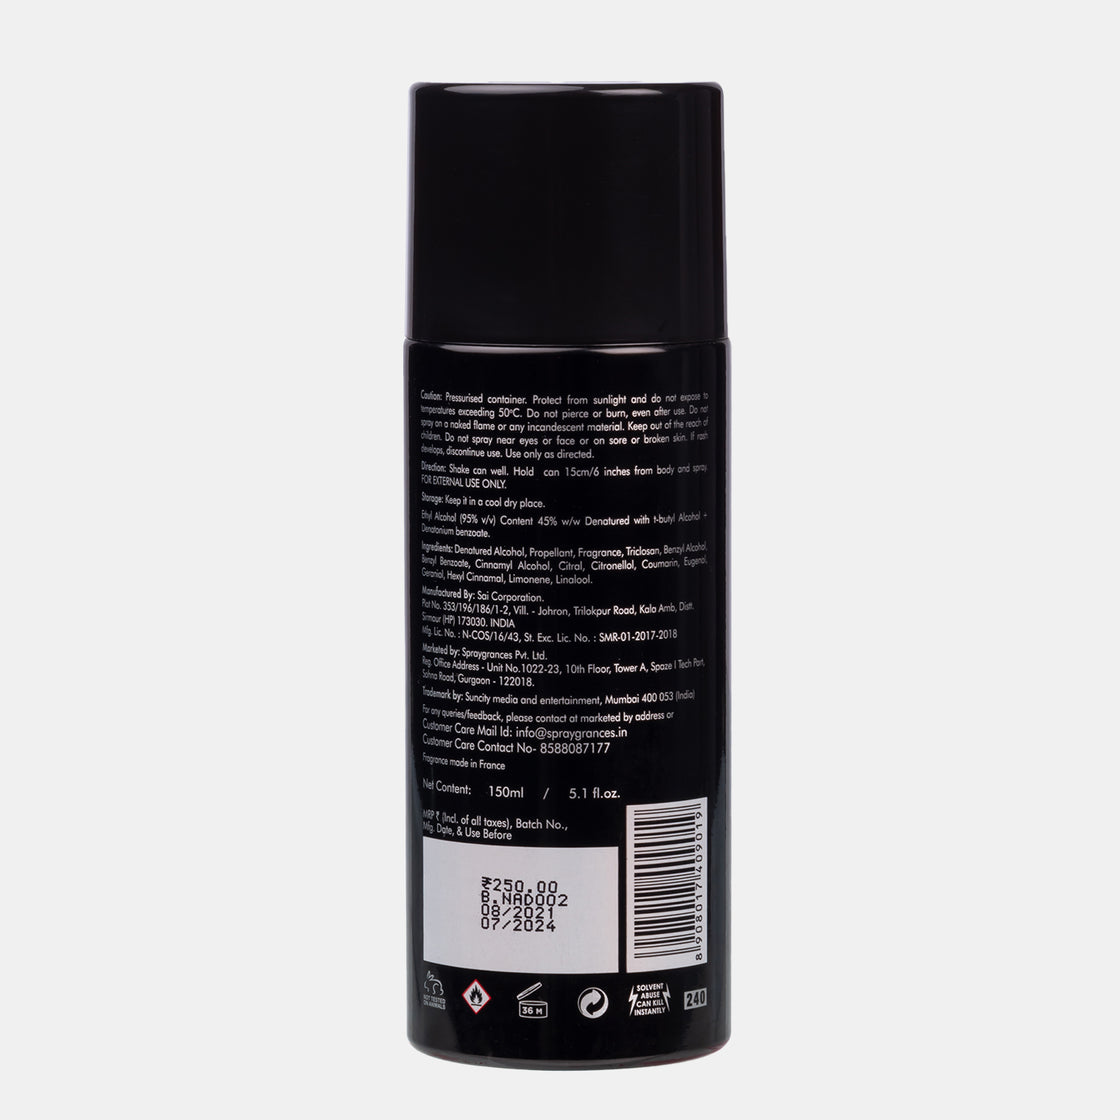 Marshals - For Him | Affetto By Sunny Leone - 150ml